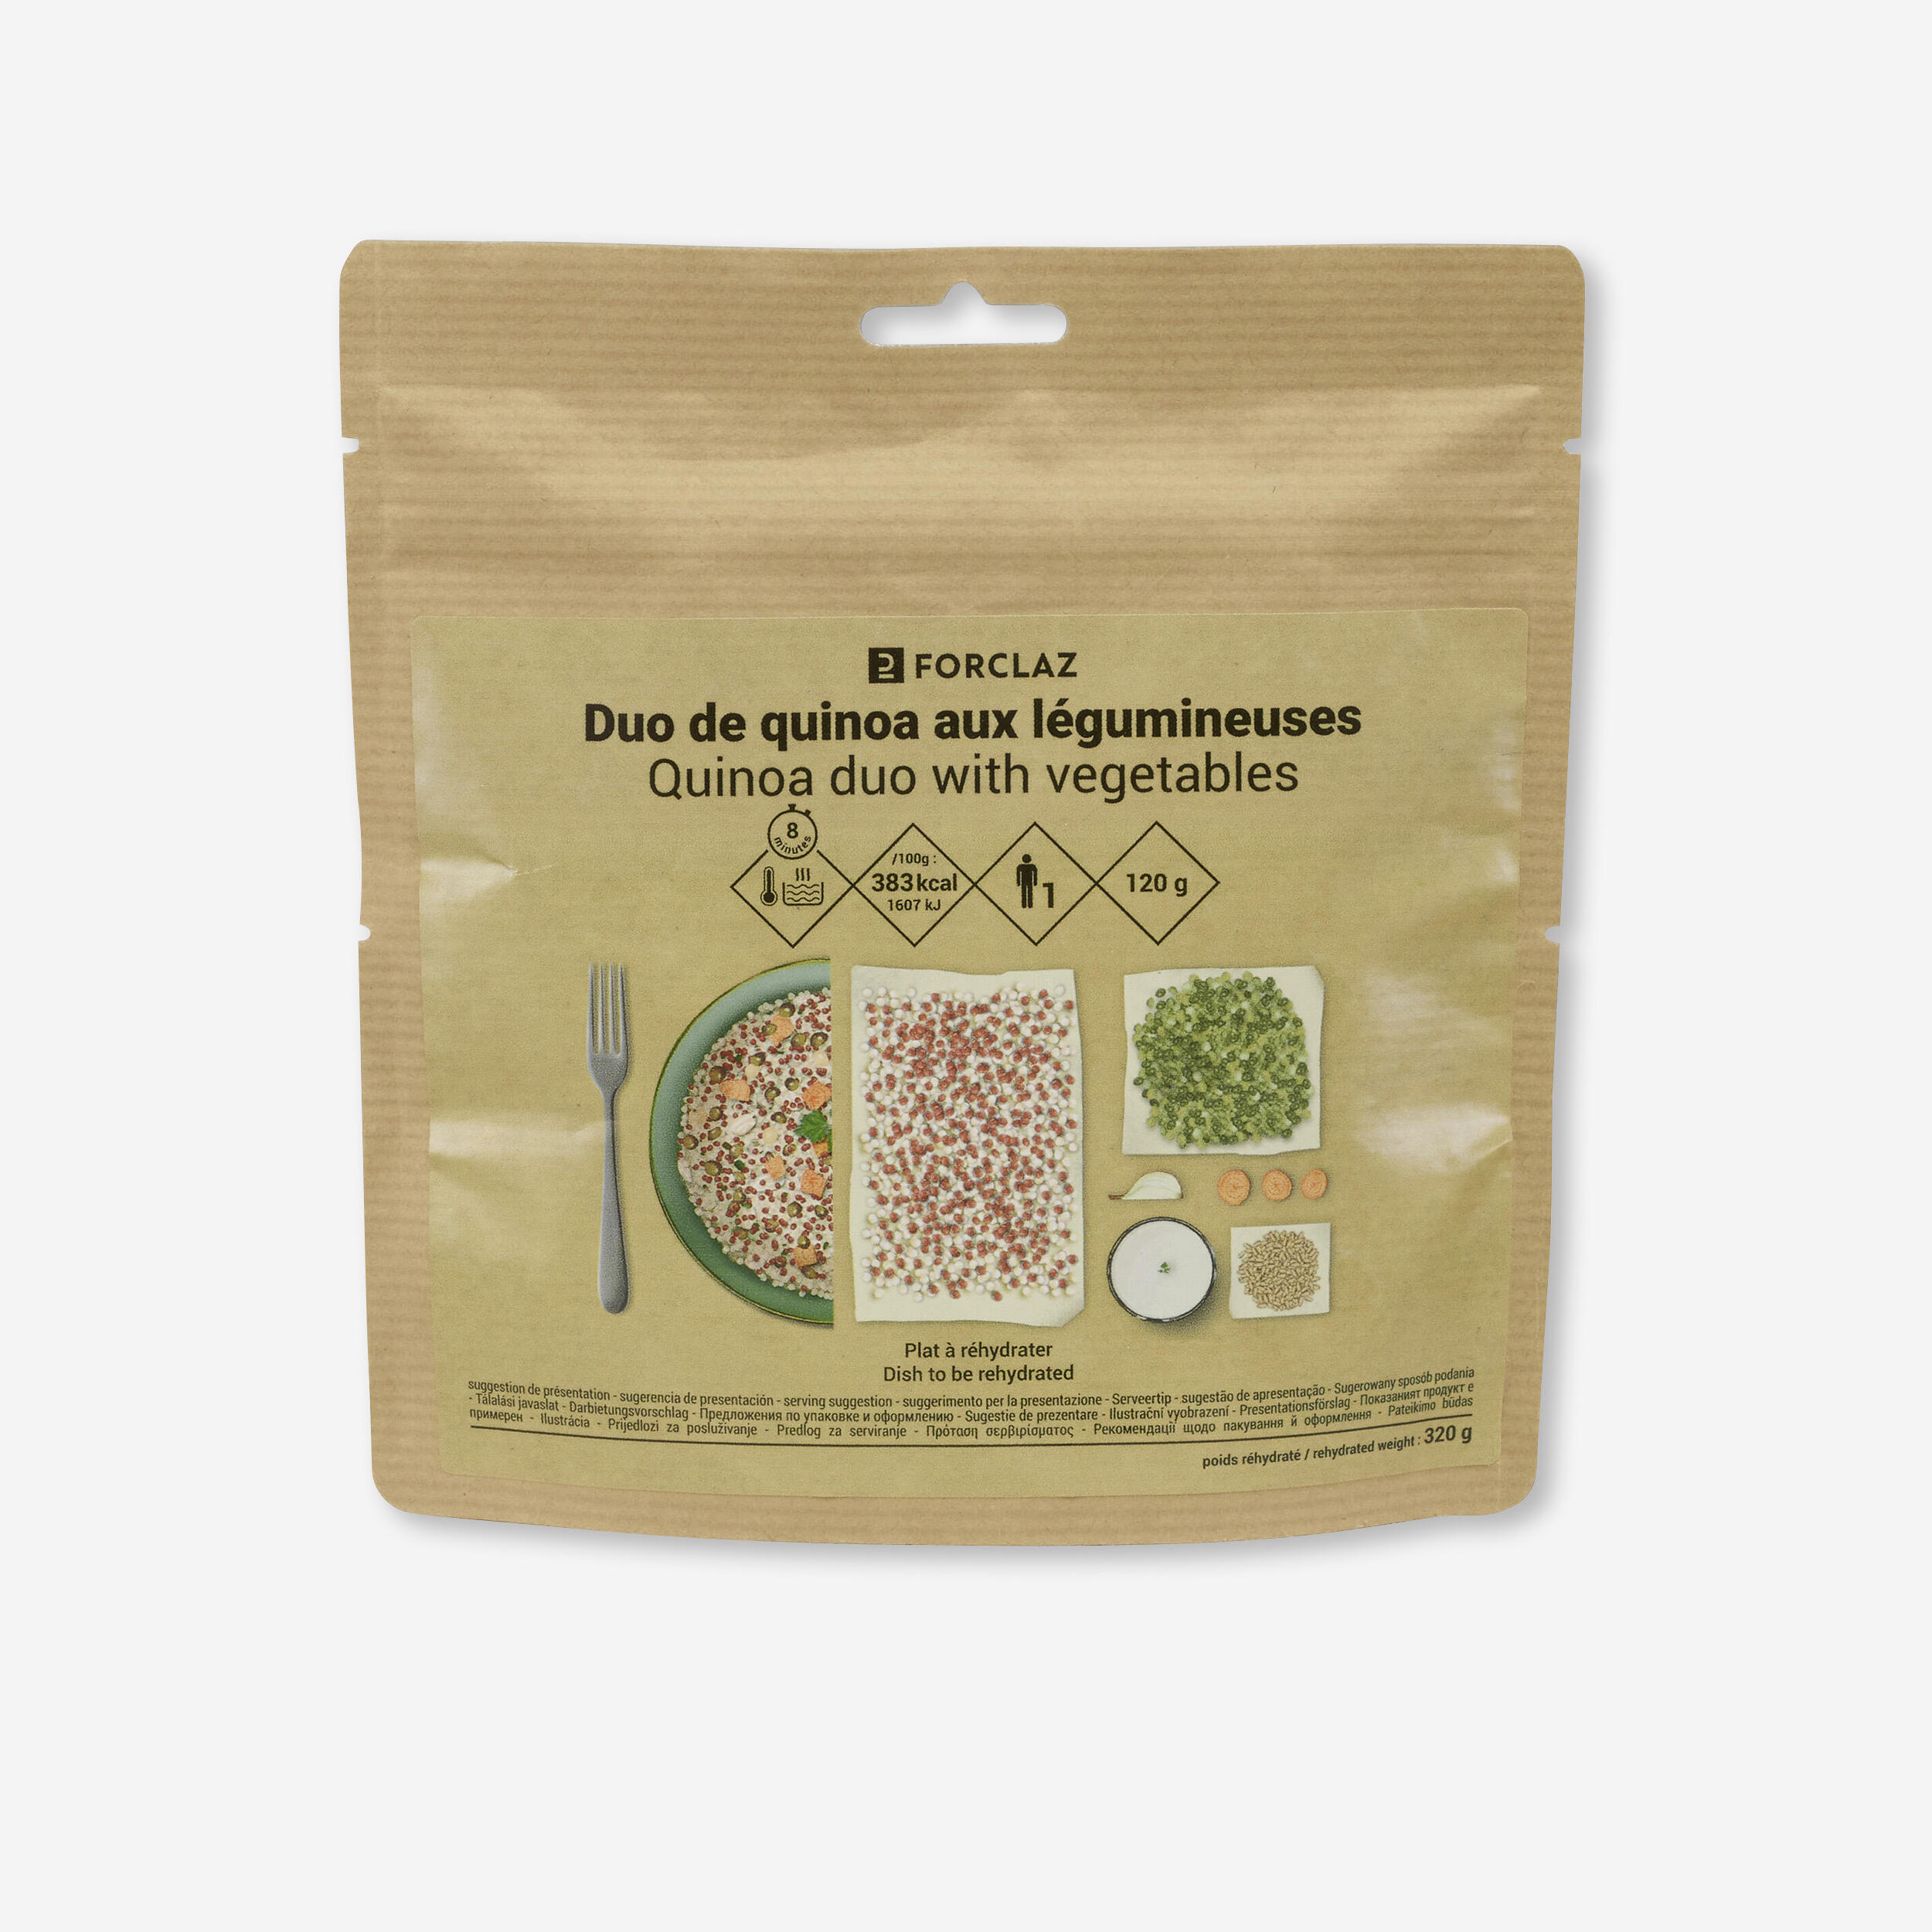 Vegetarian Dehydrated Meal - Vegetable Quinoa Duo - 120 g 1/3